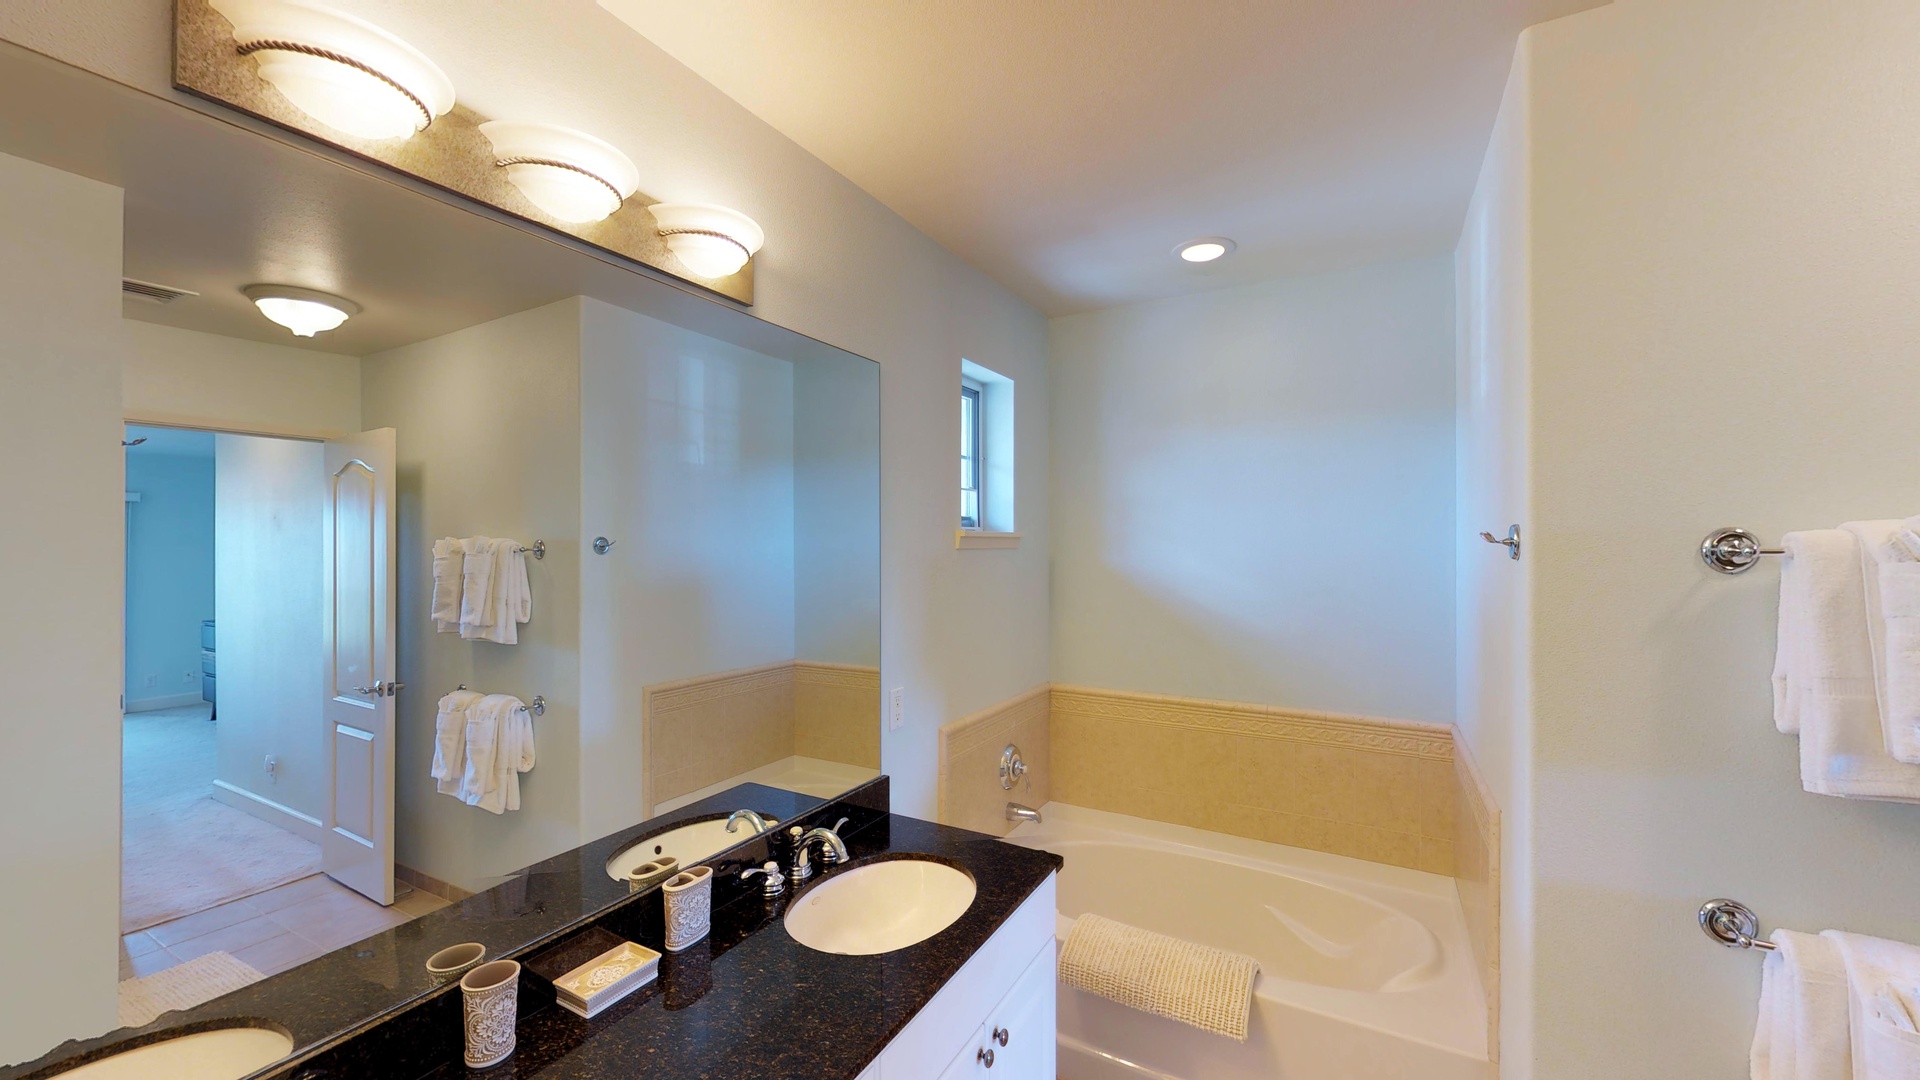 Kapolei Vacation Rentals, Ko Olina Kai 1035D - The primary guest bathroom with a soaking tub and ample lighting.